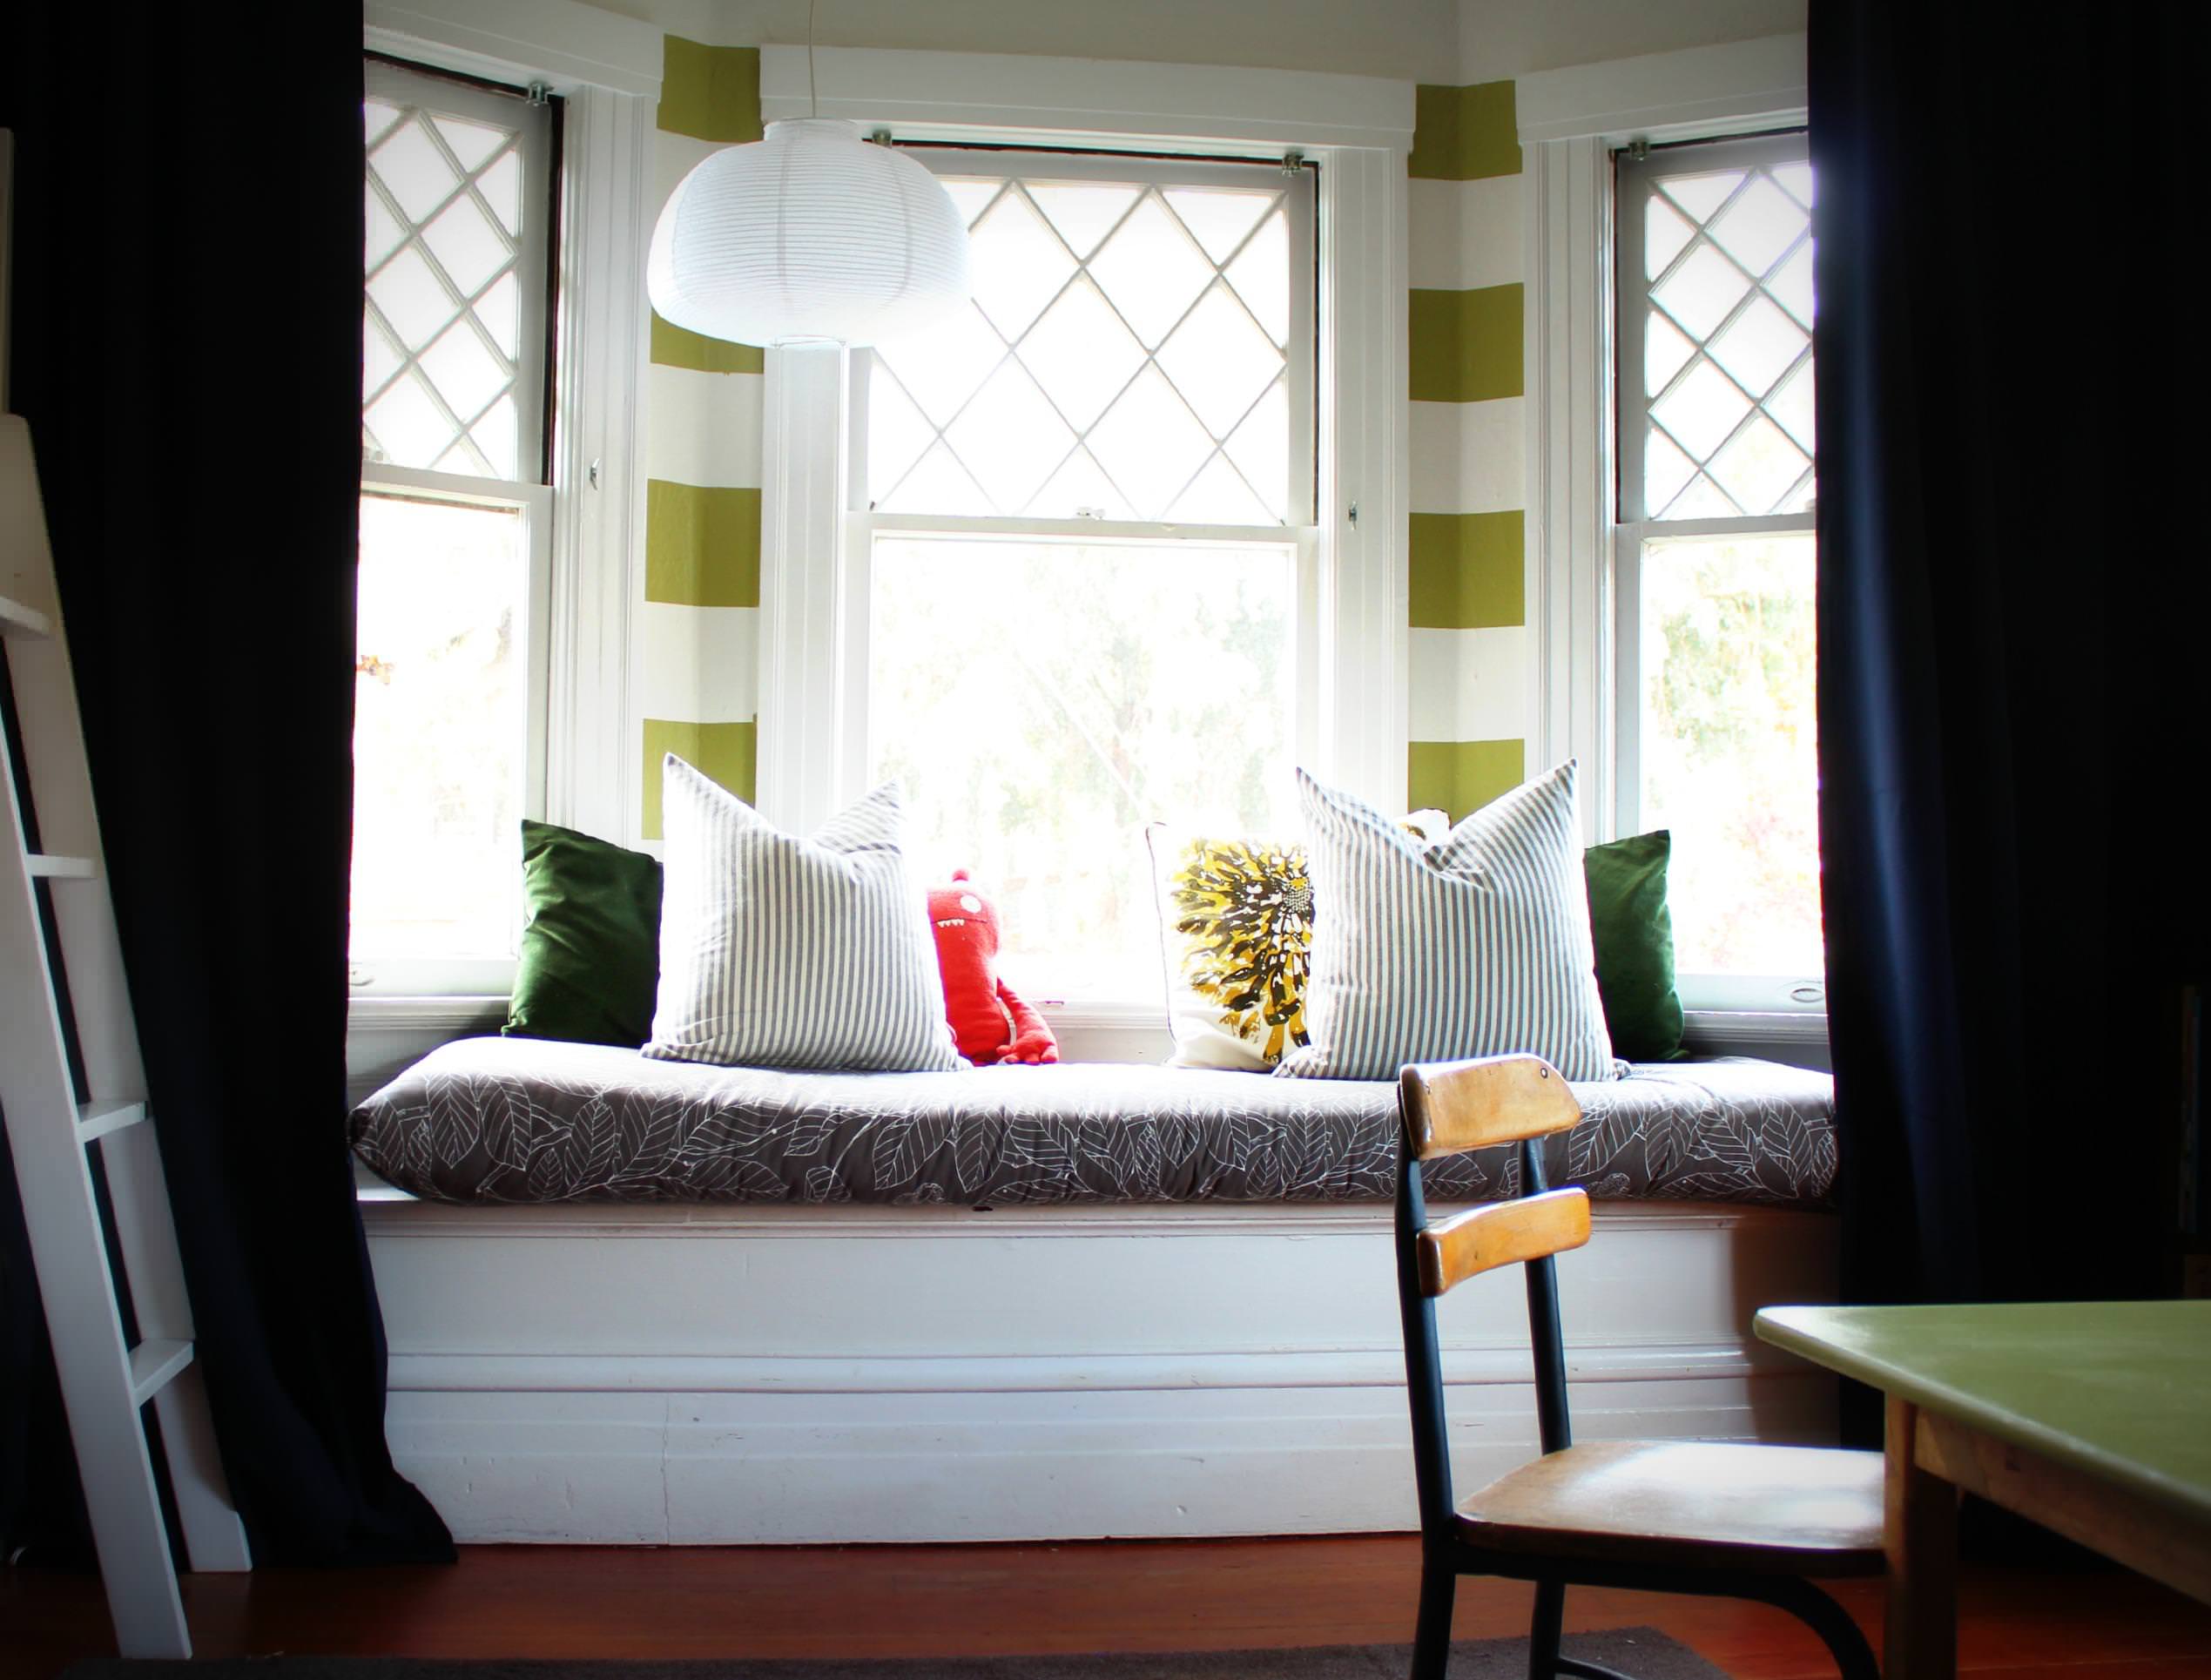 How to Decorate Bay Windows